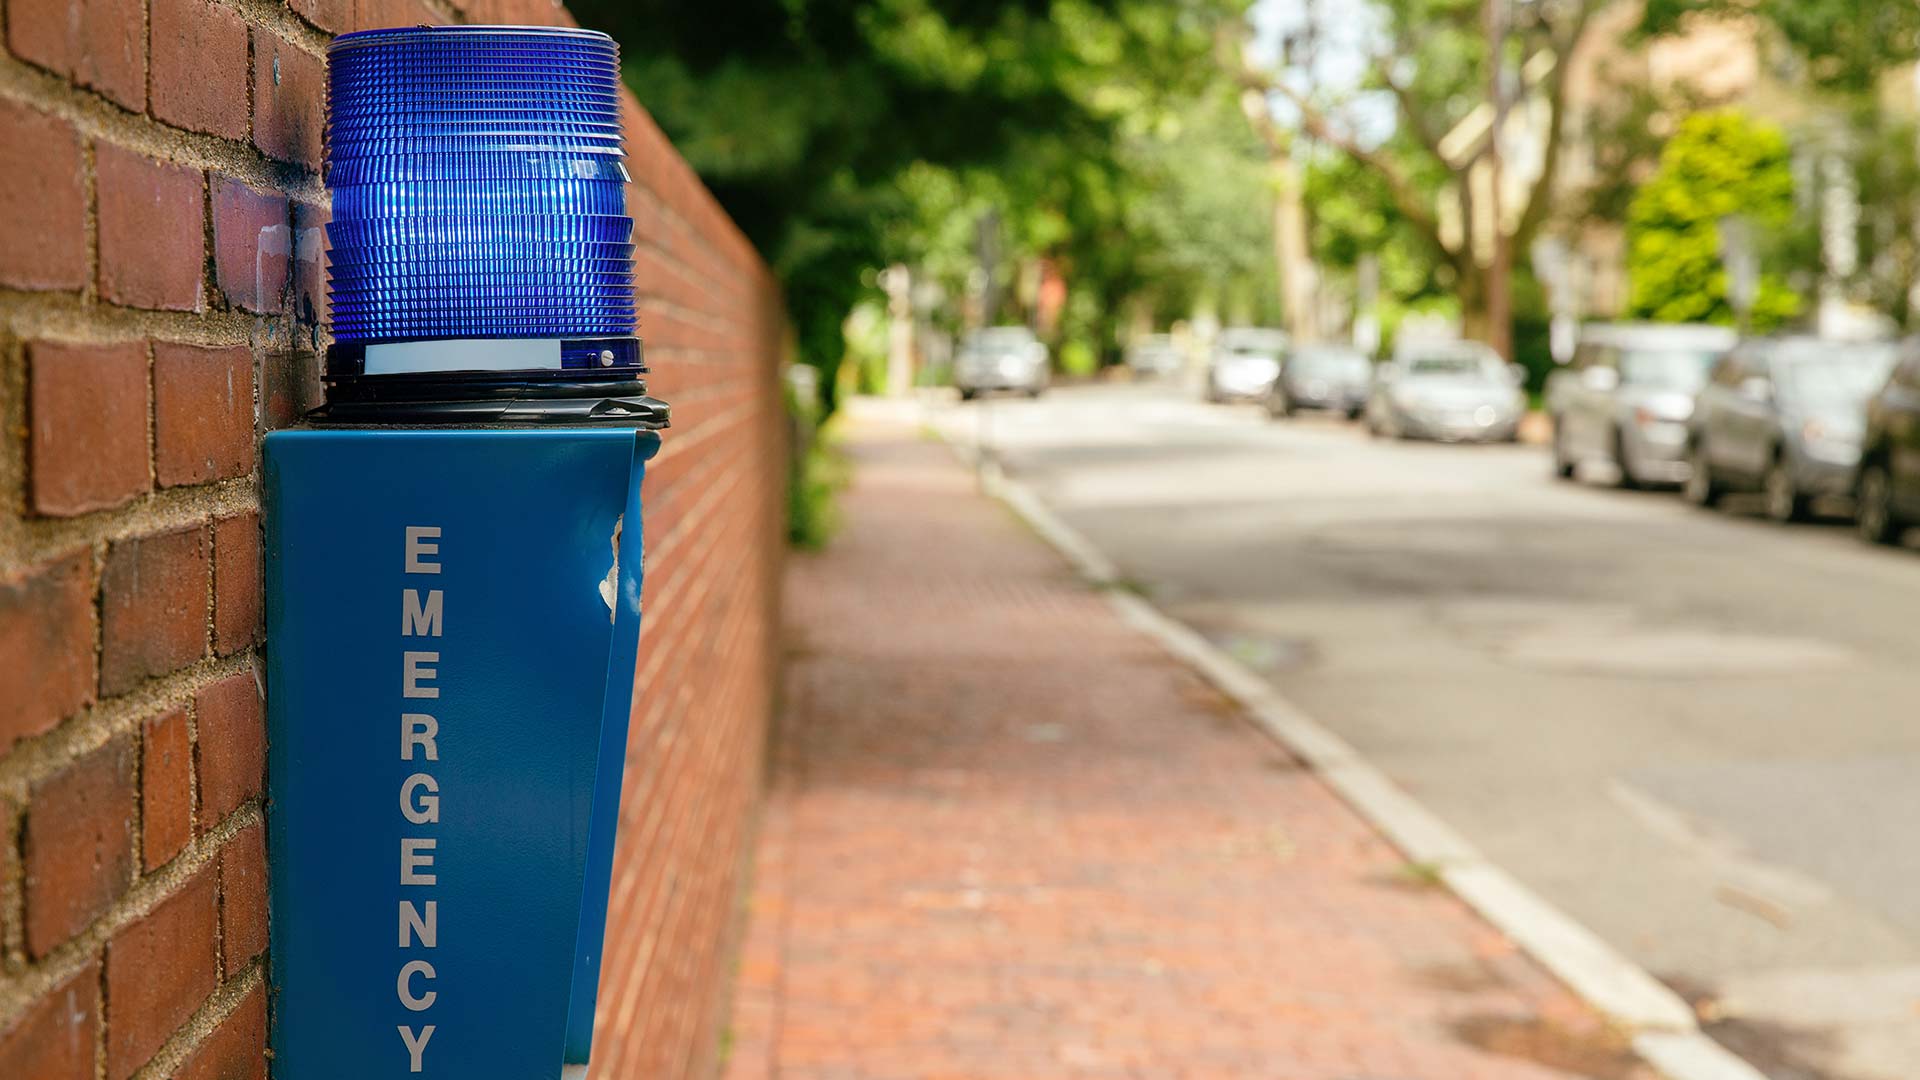 photo showing a blue box labeled EMERGENCY against a brick wall